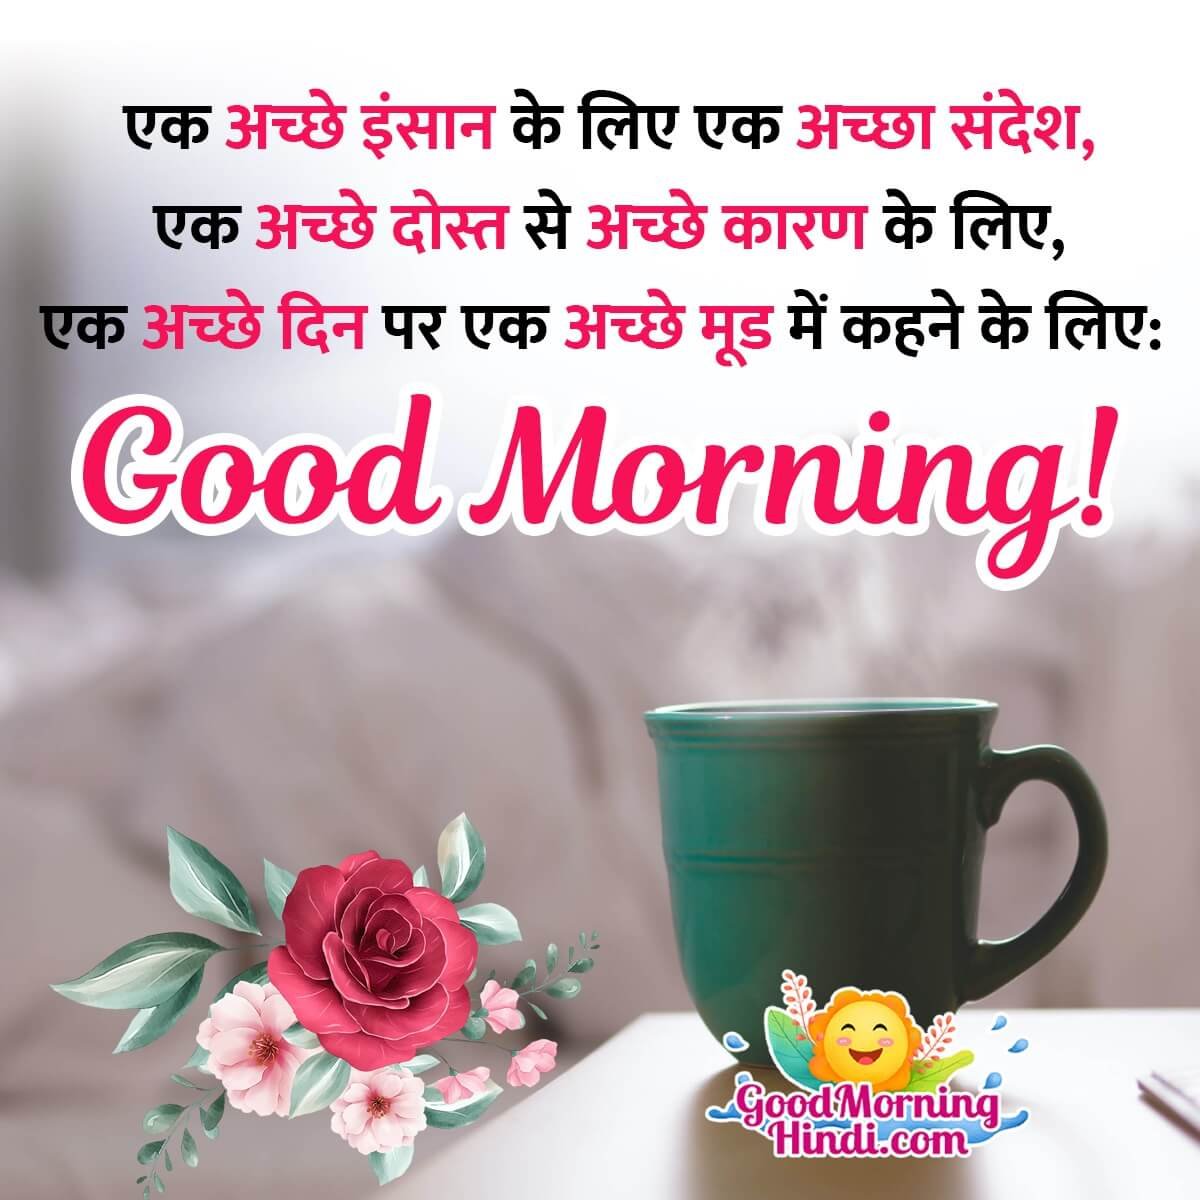 Good Morning Hindi Images For Friends - Good Morning Wishes ...